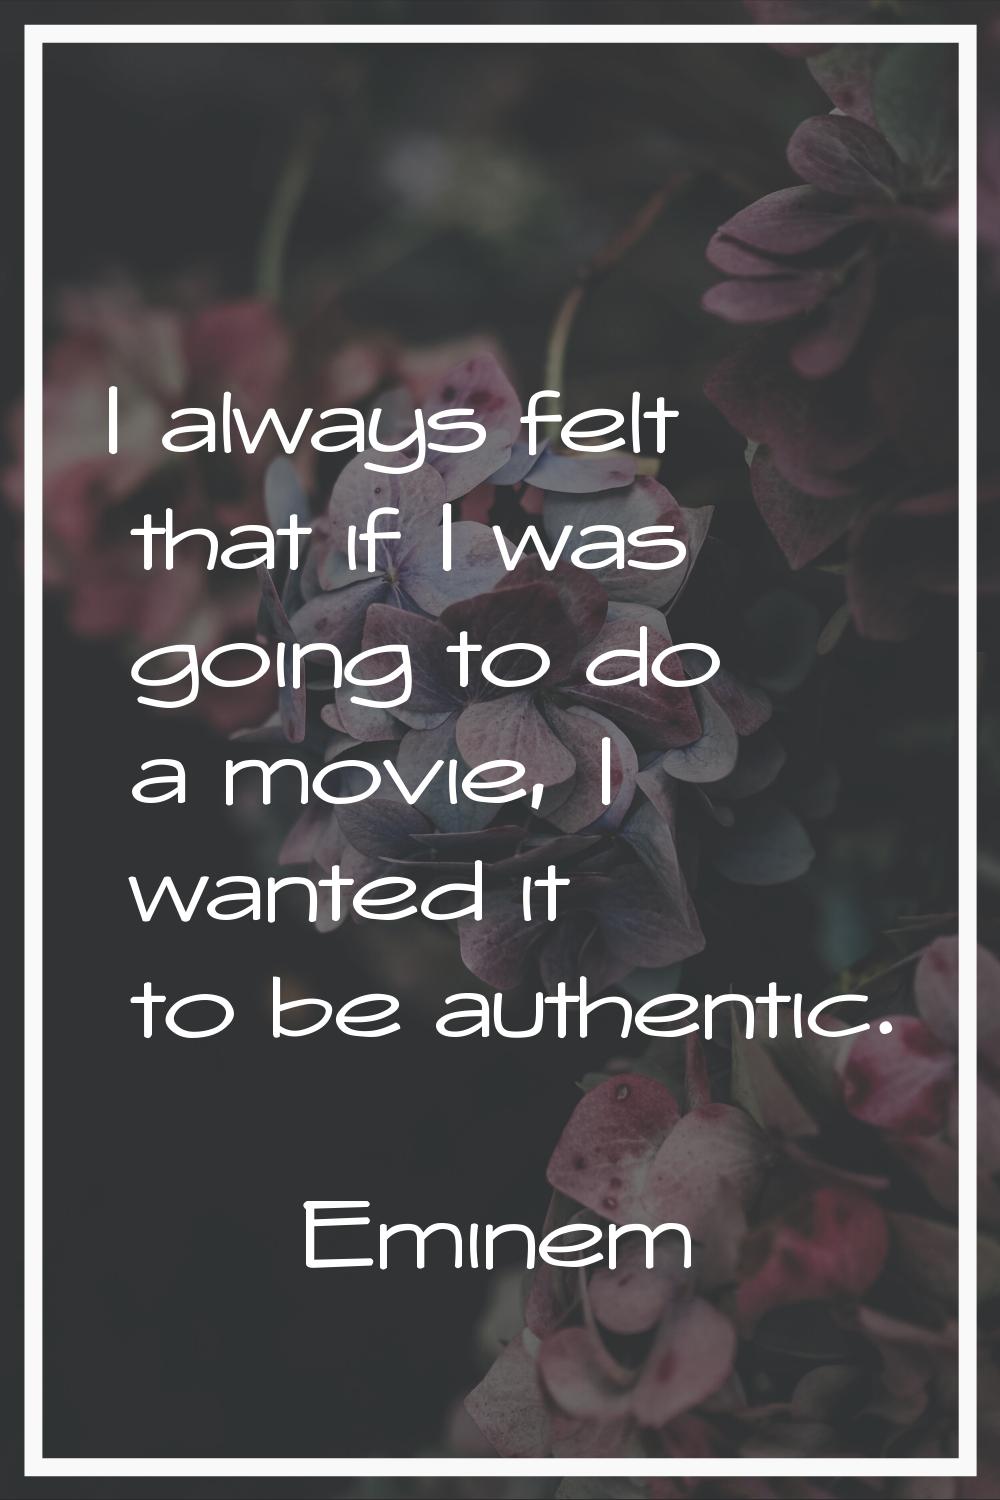 I always felt that if I was going to do a movie, I wanted it to be authentic.